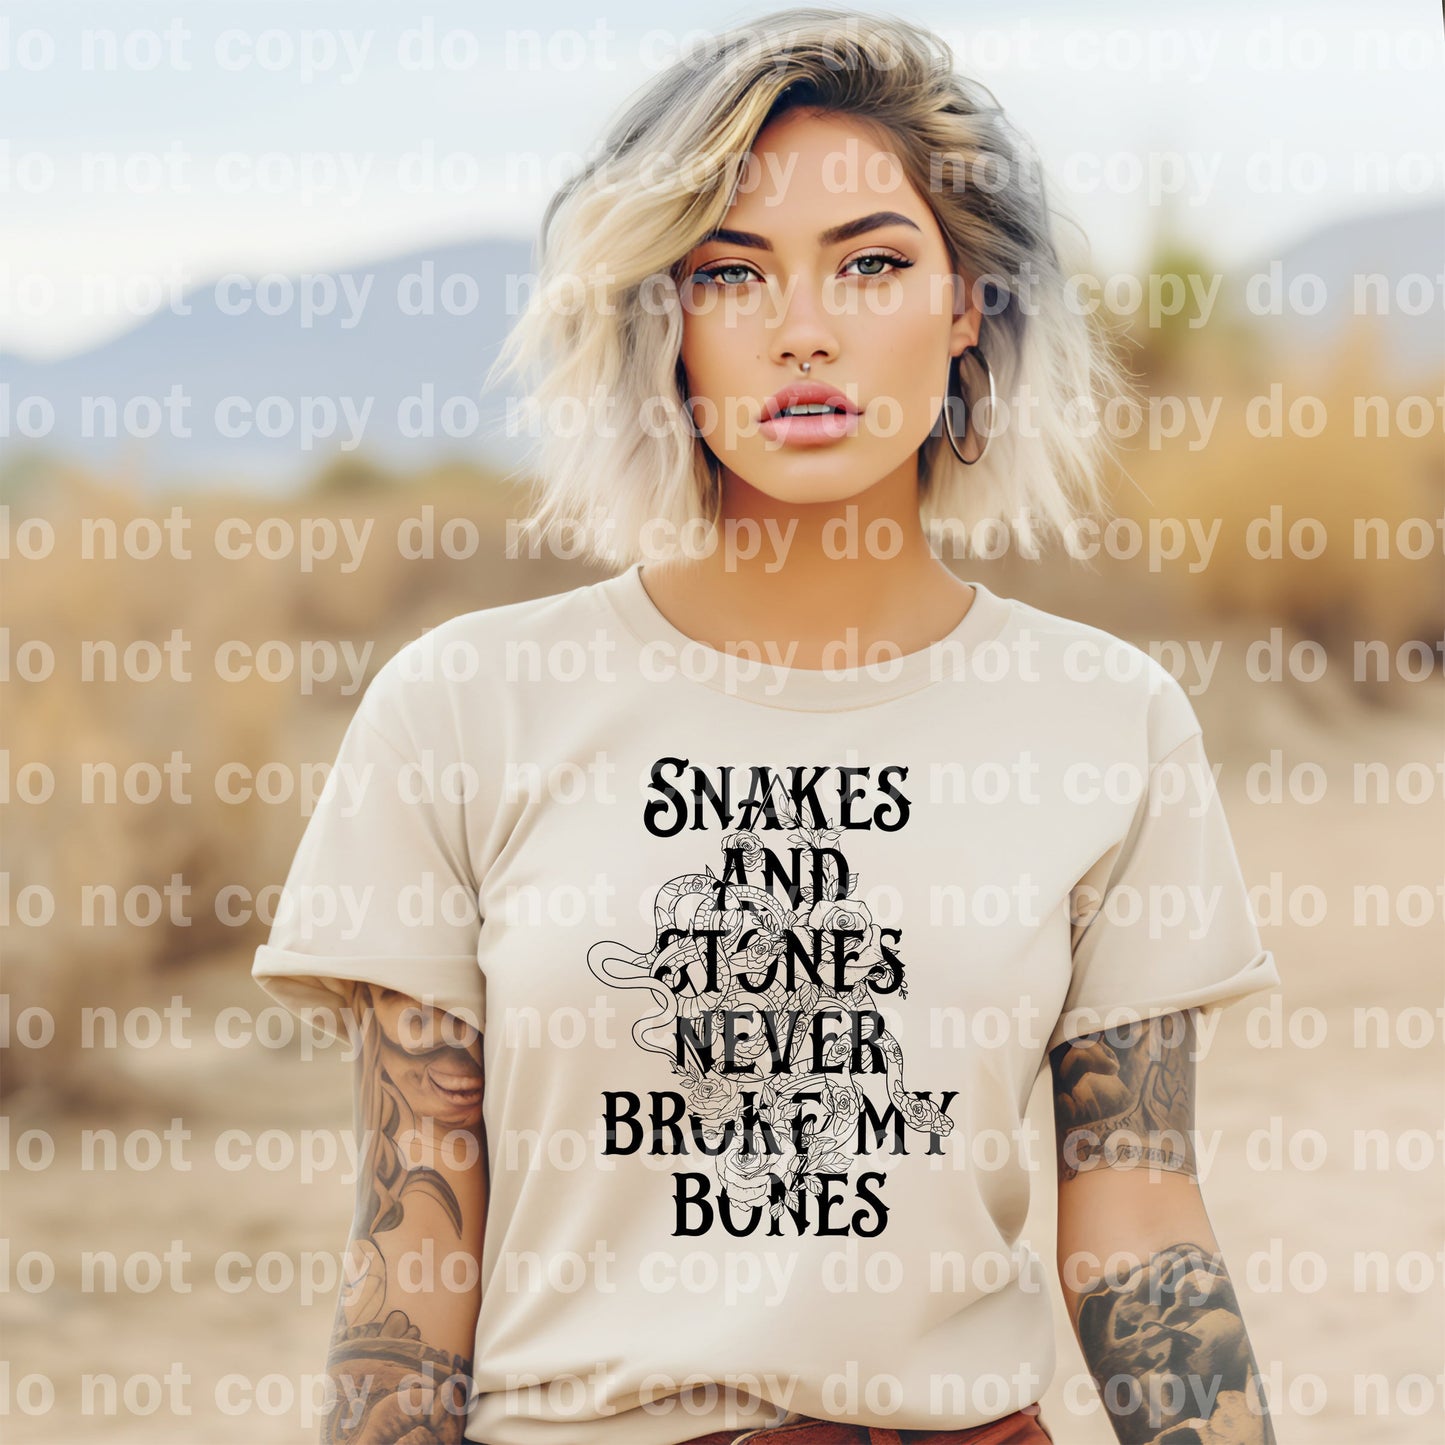 Snakes and Stones Never Broke My Bones Full Color/One Color Dream Print or Sublimation Print